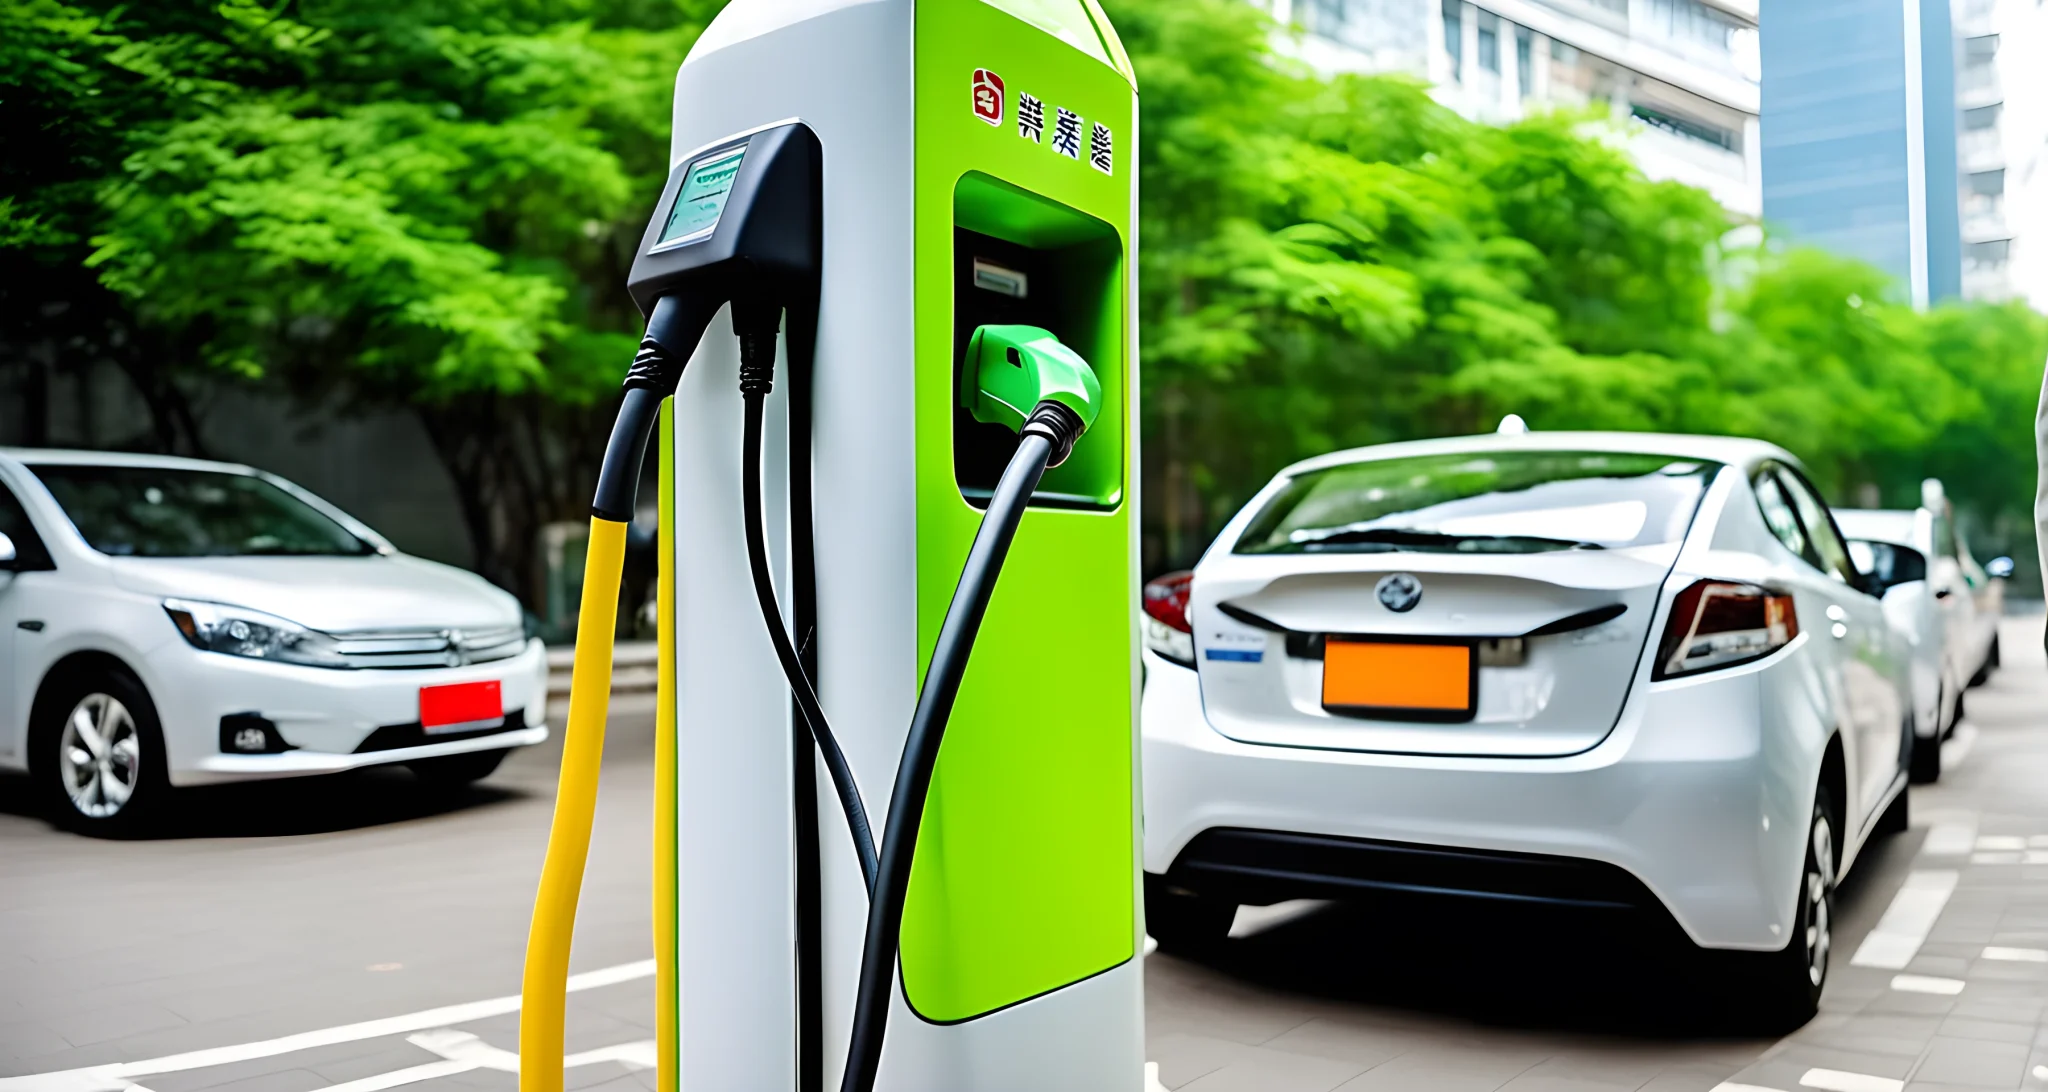 The image shows a hybrid electric vehicle being charged at a government-approved charging station in China.